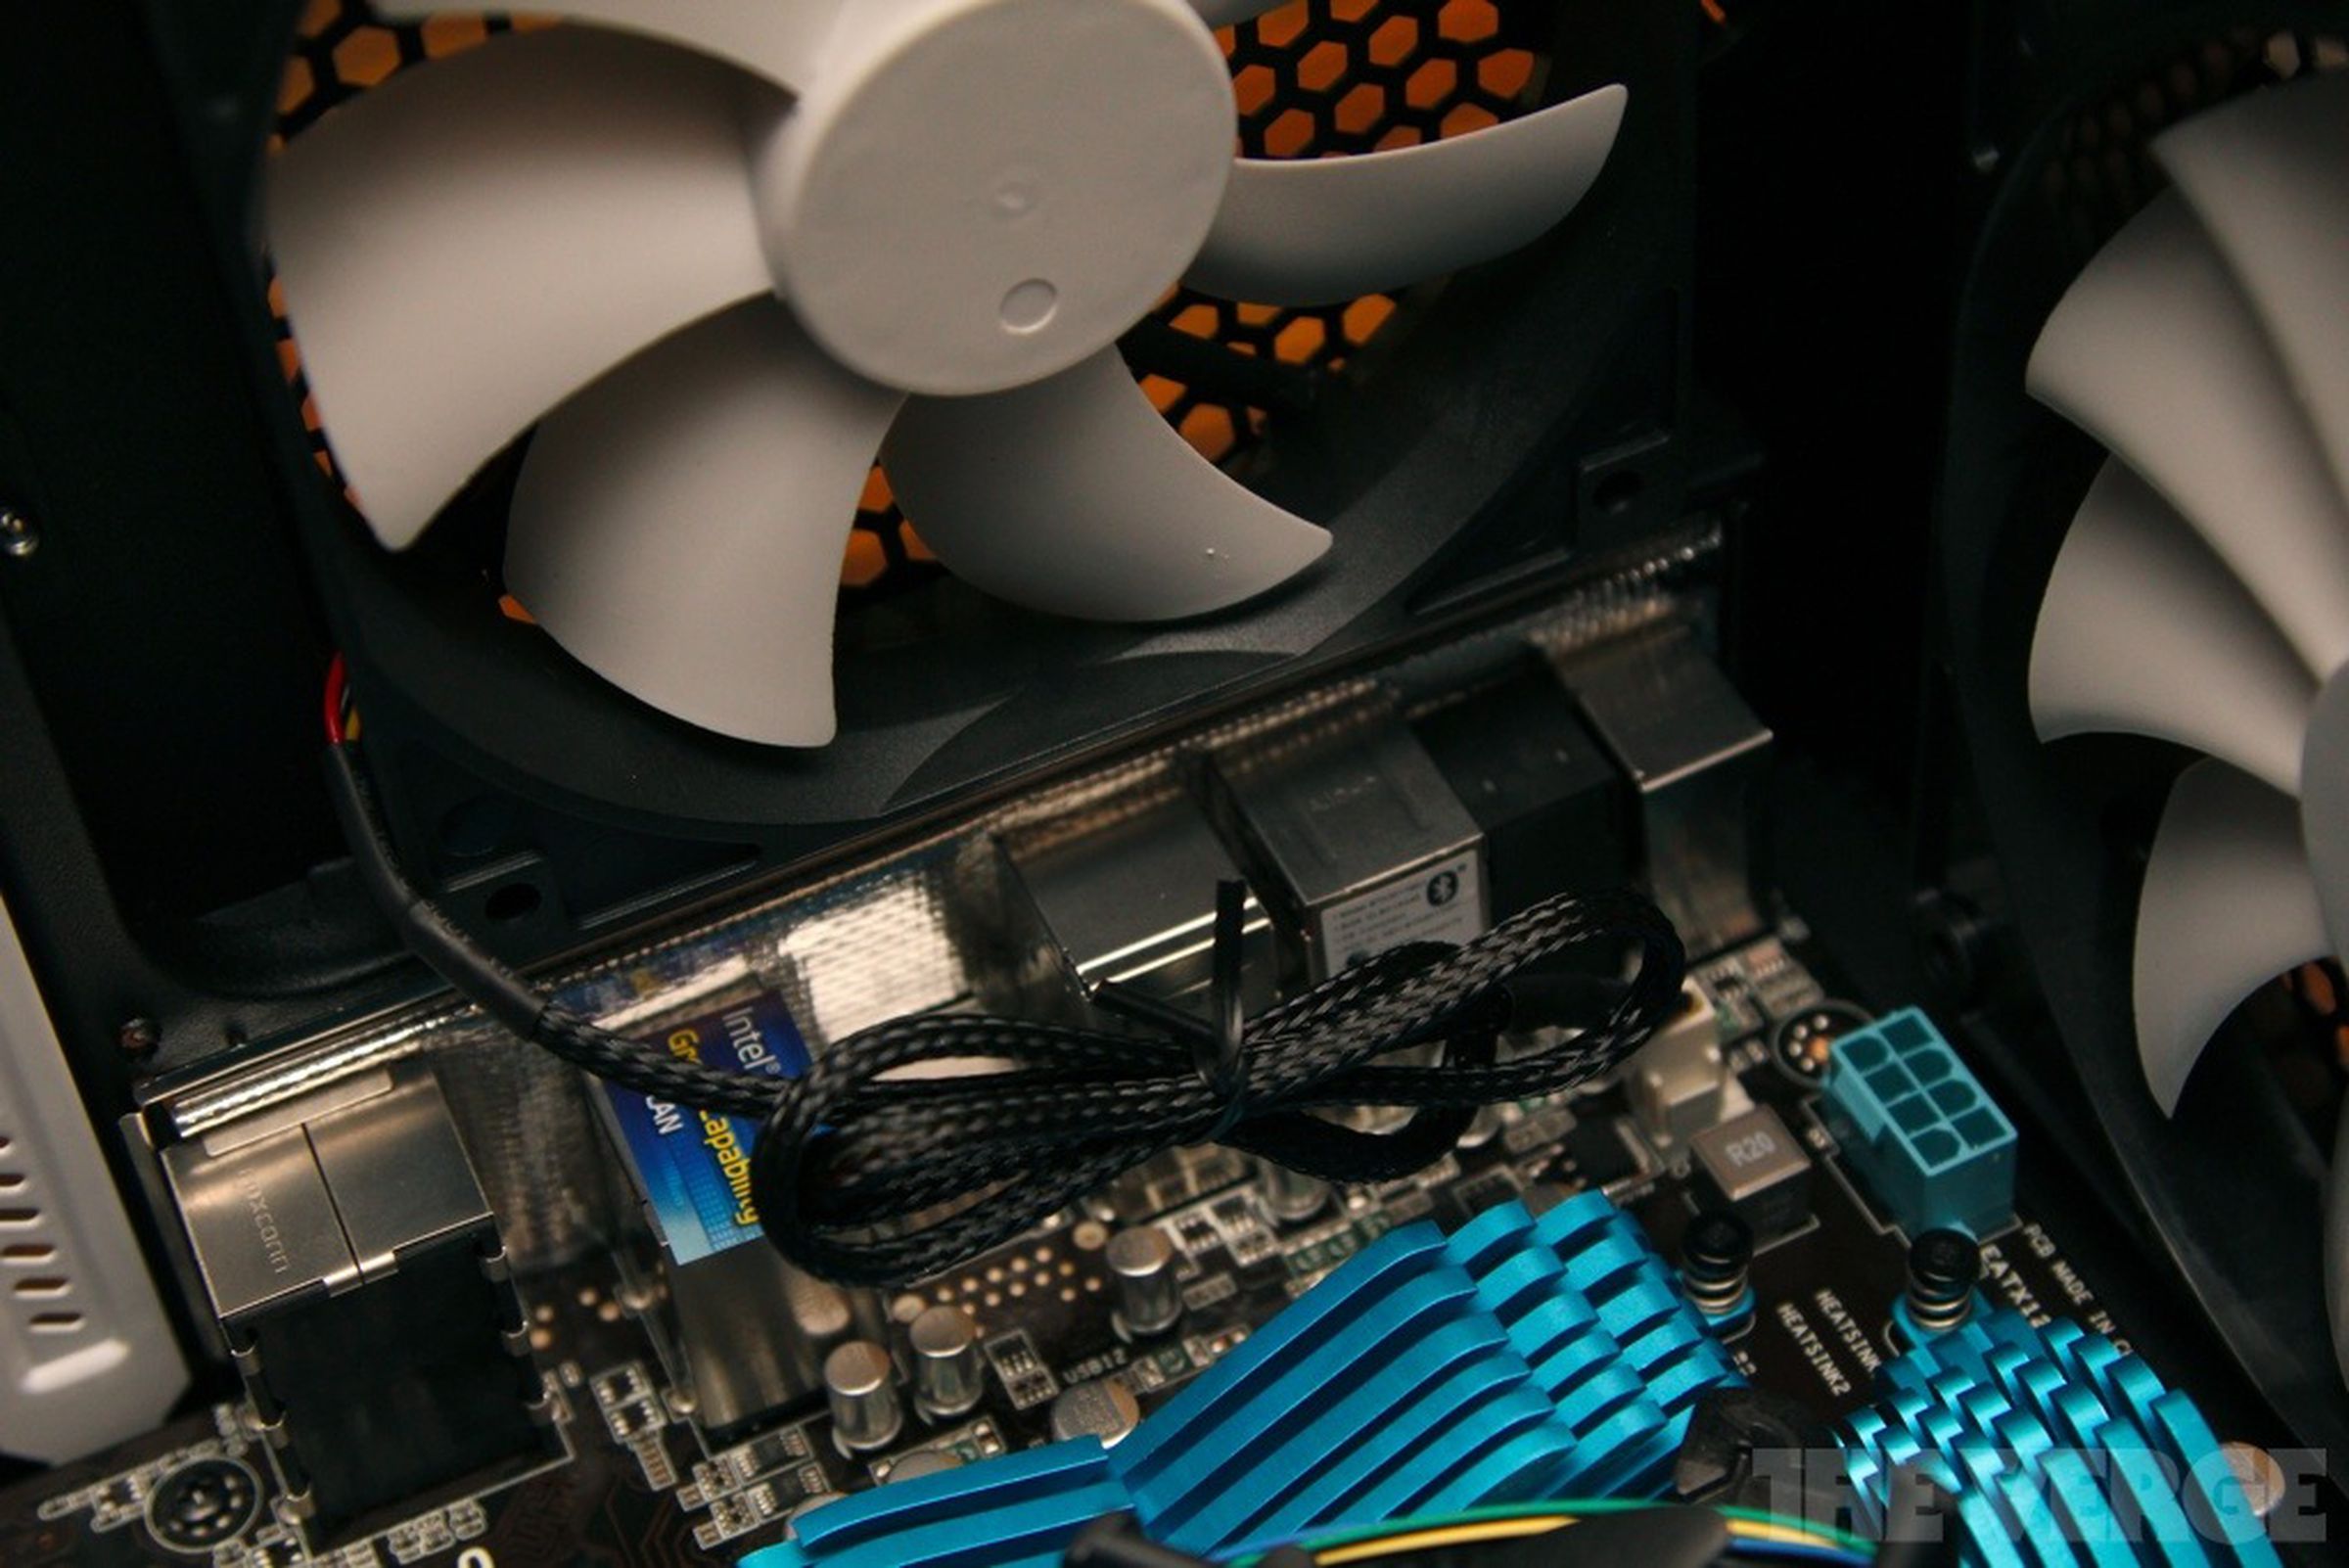 The Verge Gaming Rig: from components to completion